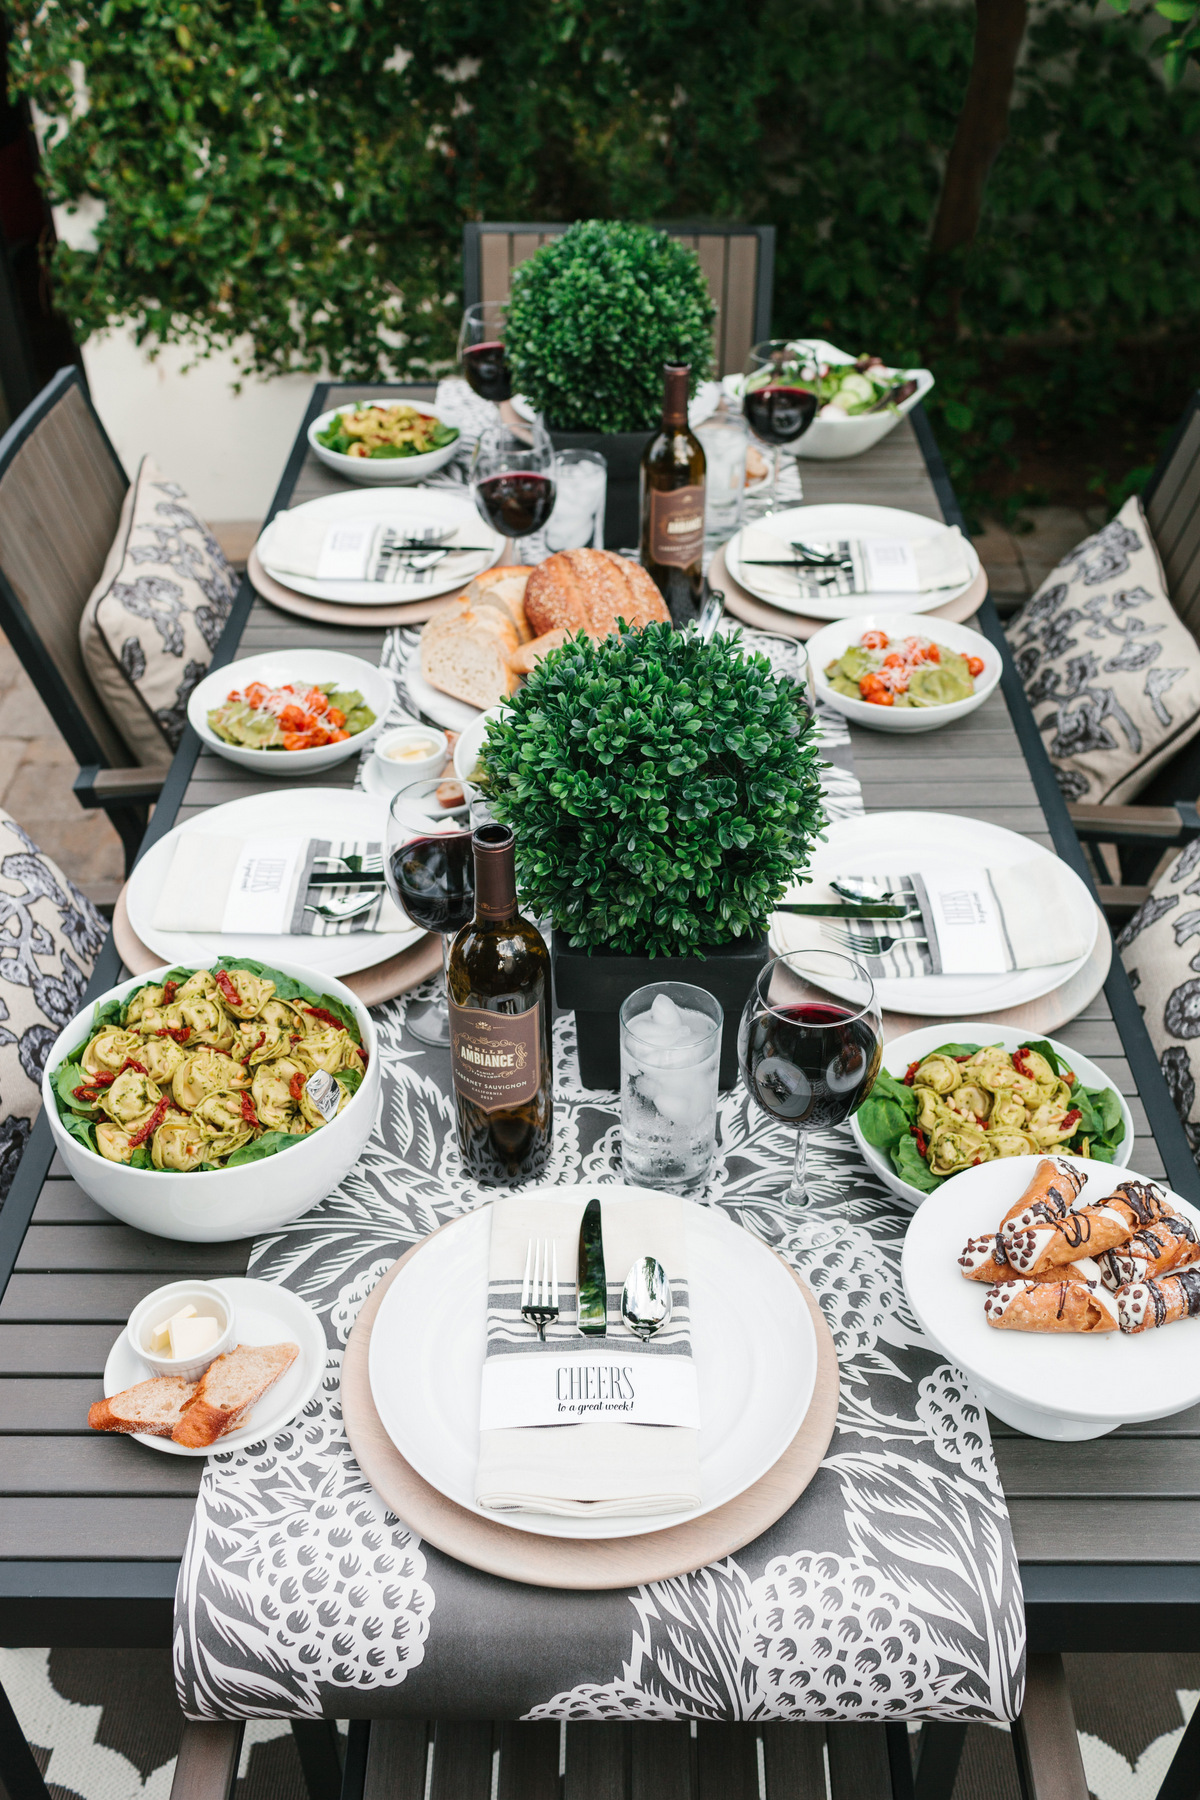 Buitoni Dinner styled by The TomKat Studio